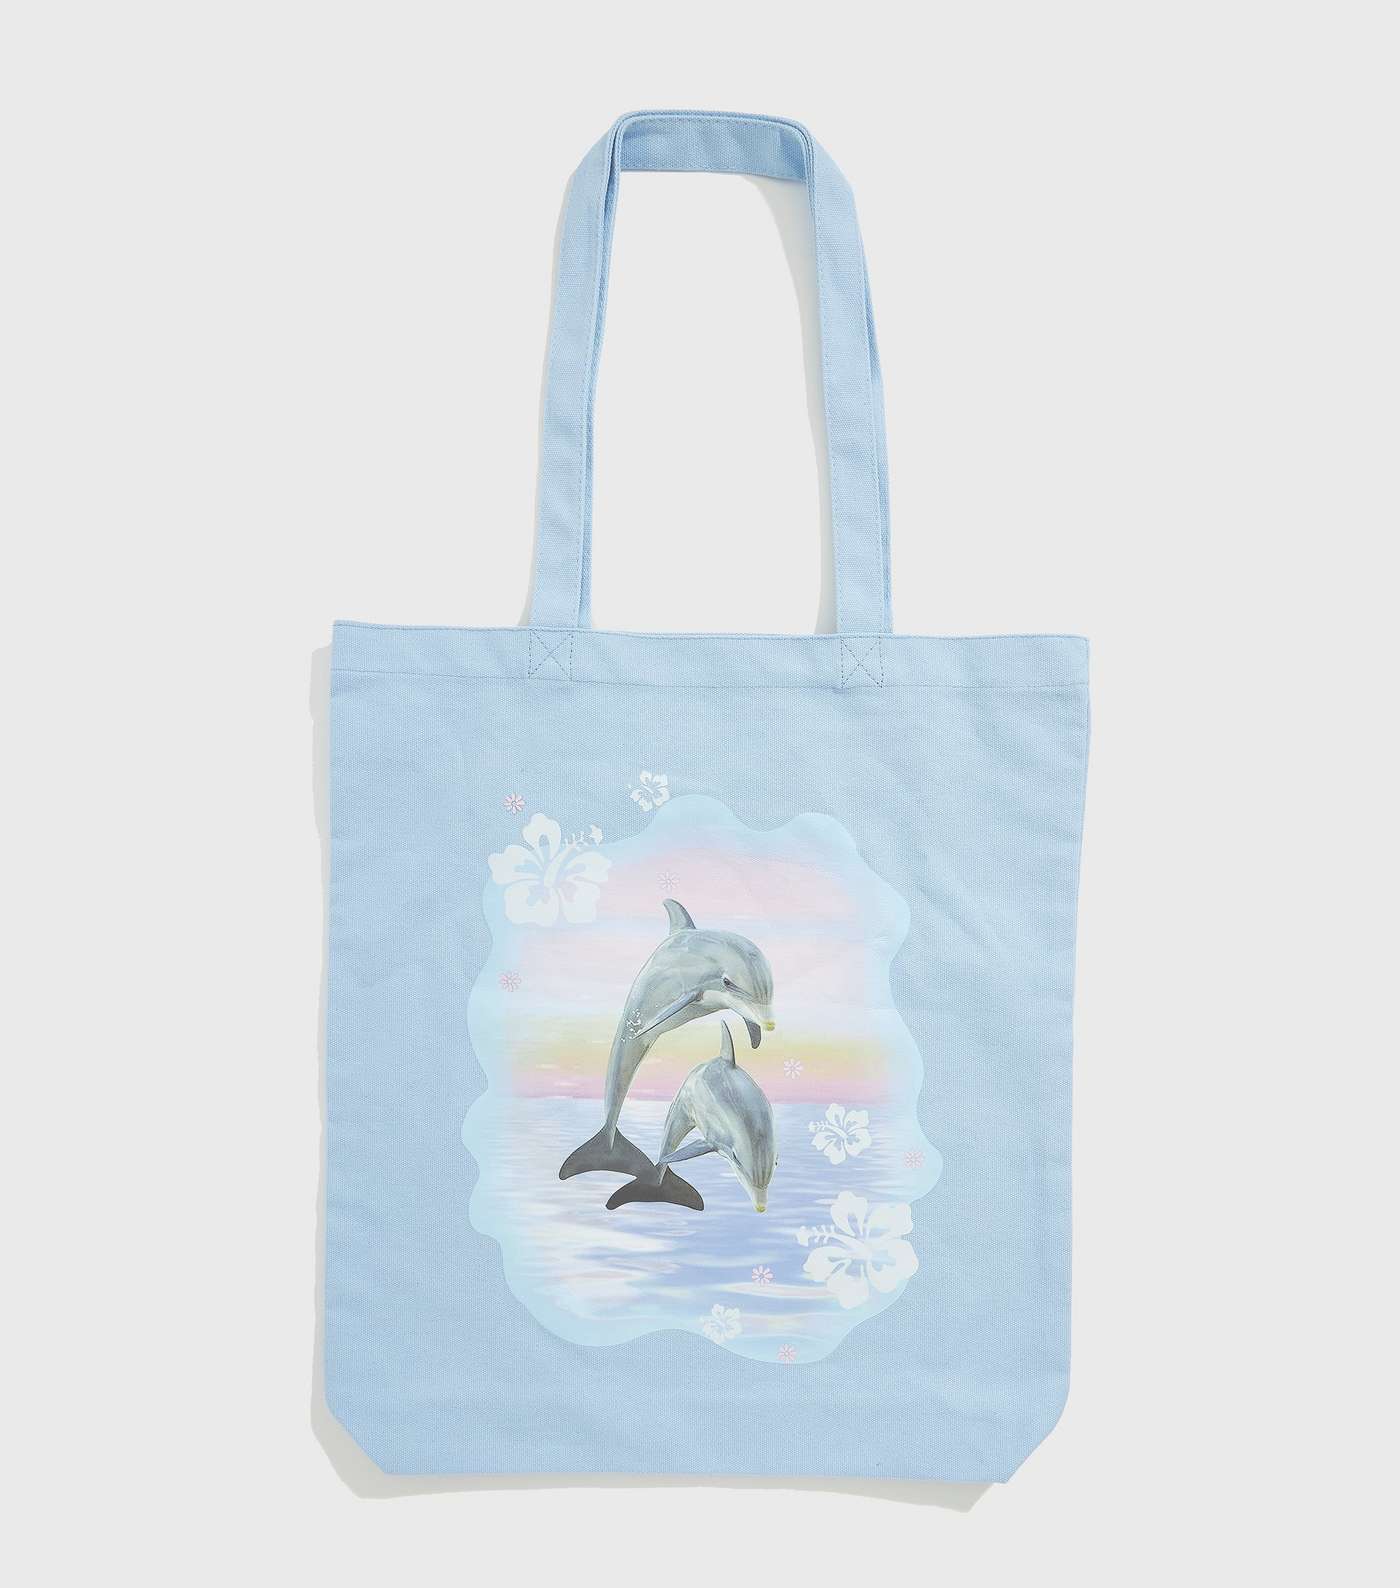 Skinnydip Bright Blue Dolphin Sunset Tote Bag